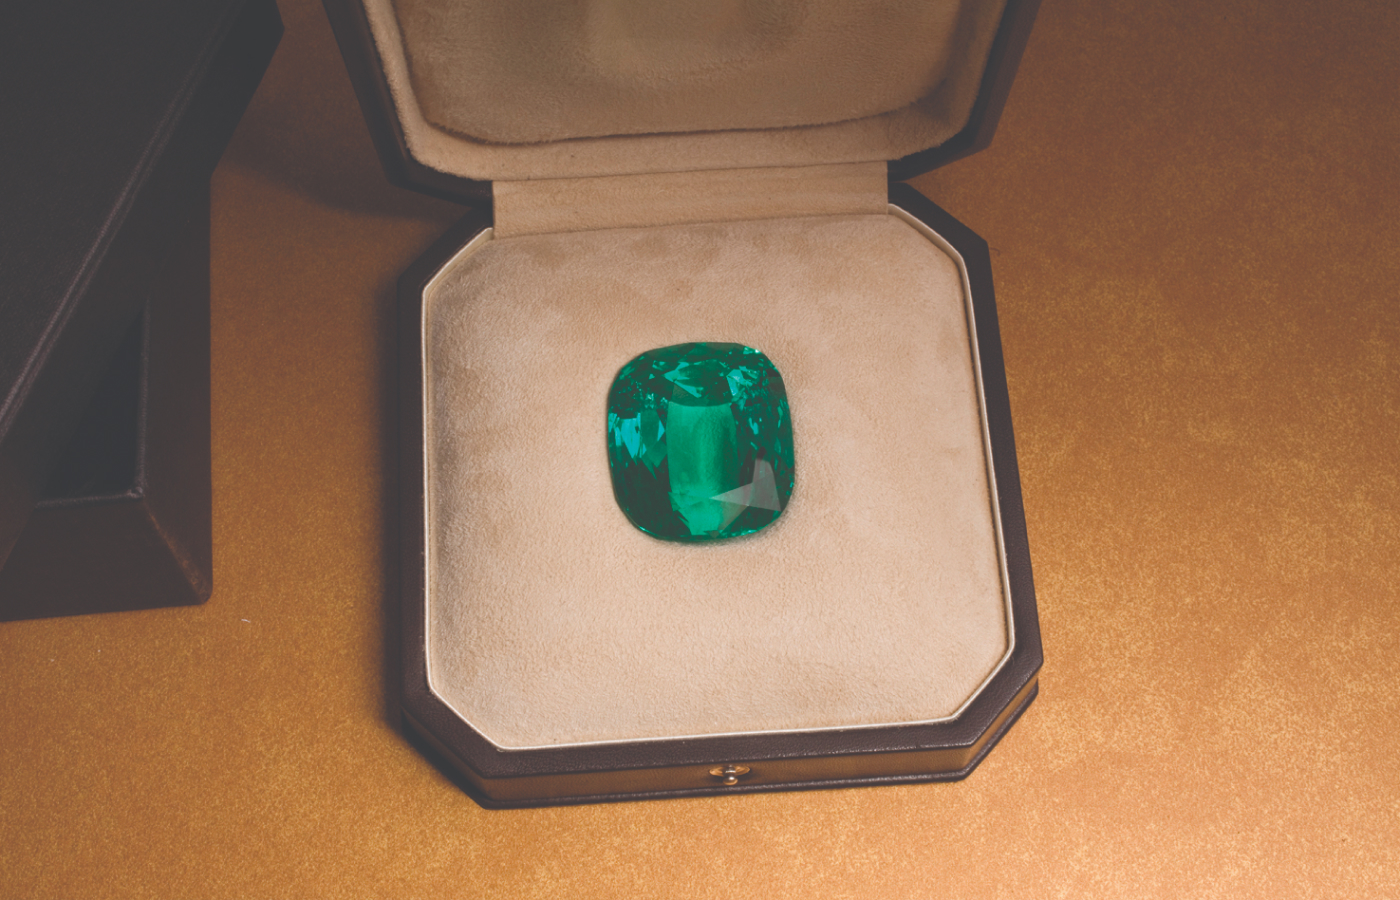 The Bayco The Imperial Emerald - A remarkable 206-ct unenhanced cushion Colombian emerald